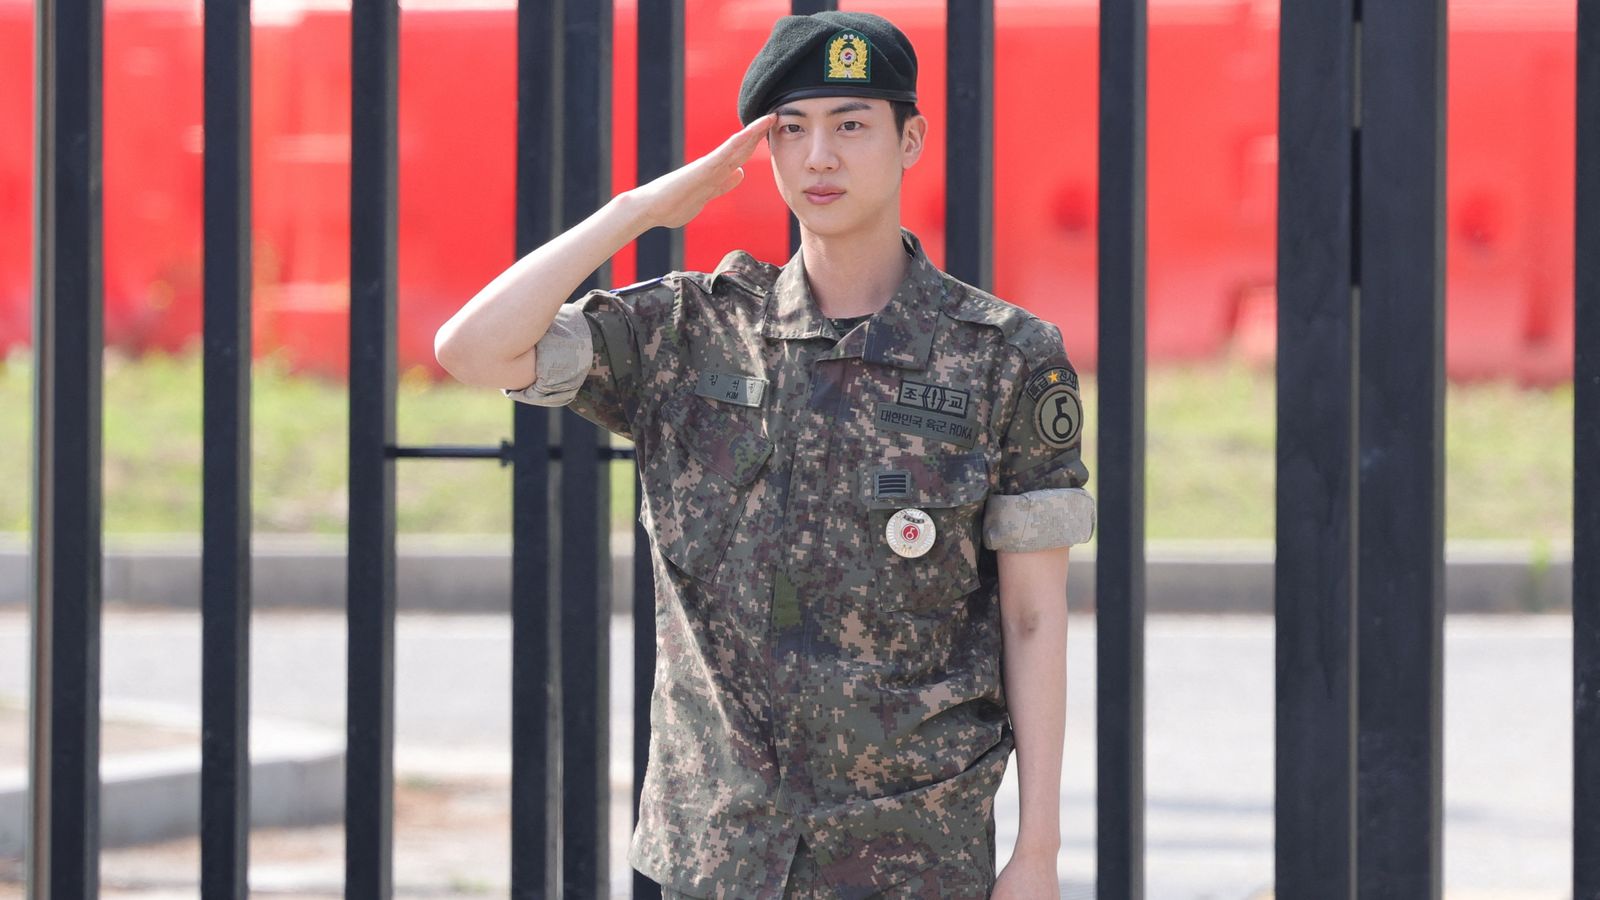 BTS star Jin celebrates discharge from military service by hugging 1,000 fans at festival